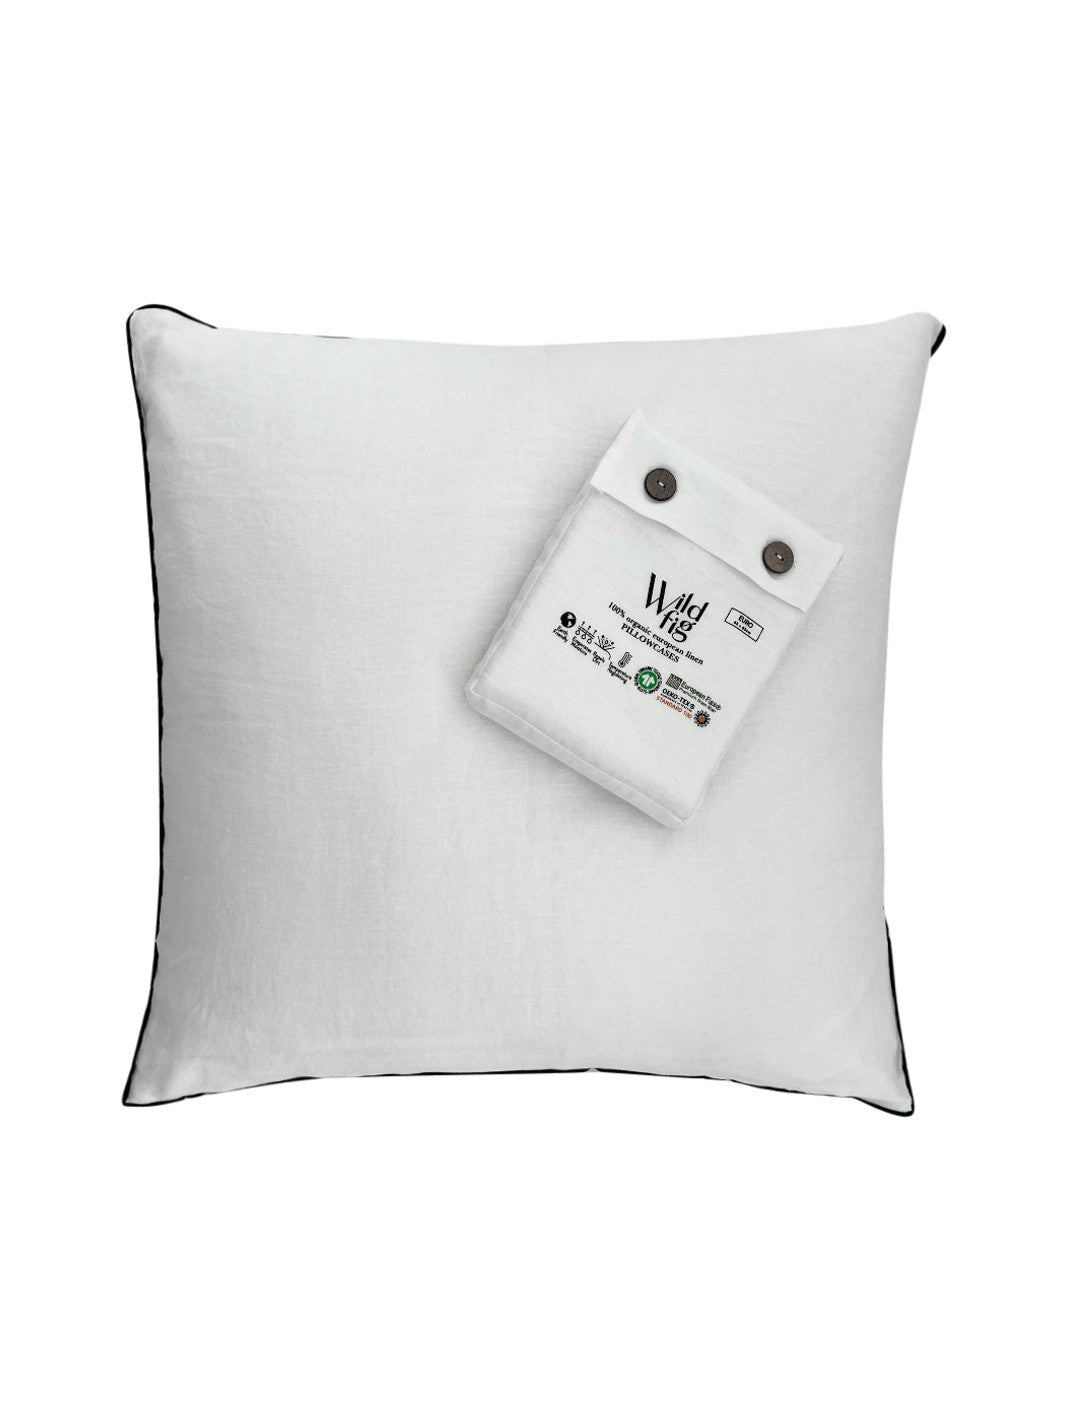 HAMPTONS EURO PILLOW COVERS  WITH A ZIP  (PACK OF 2)